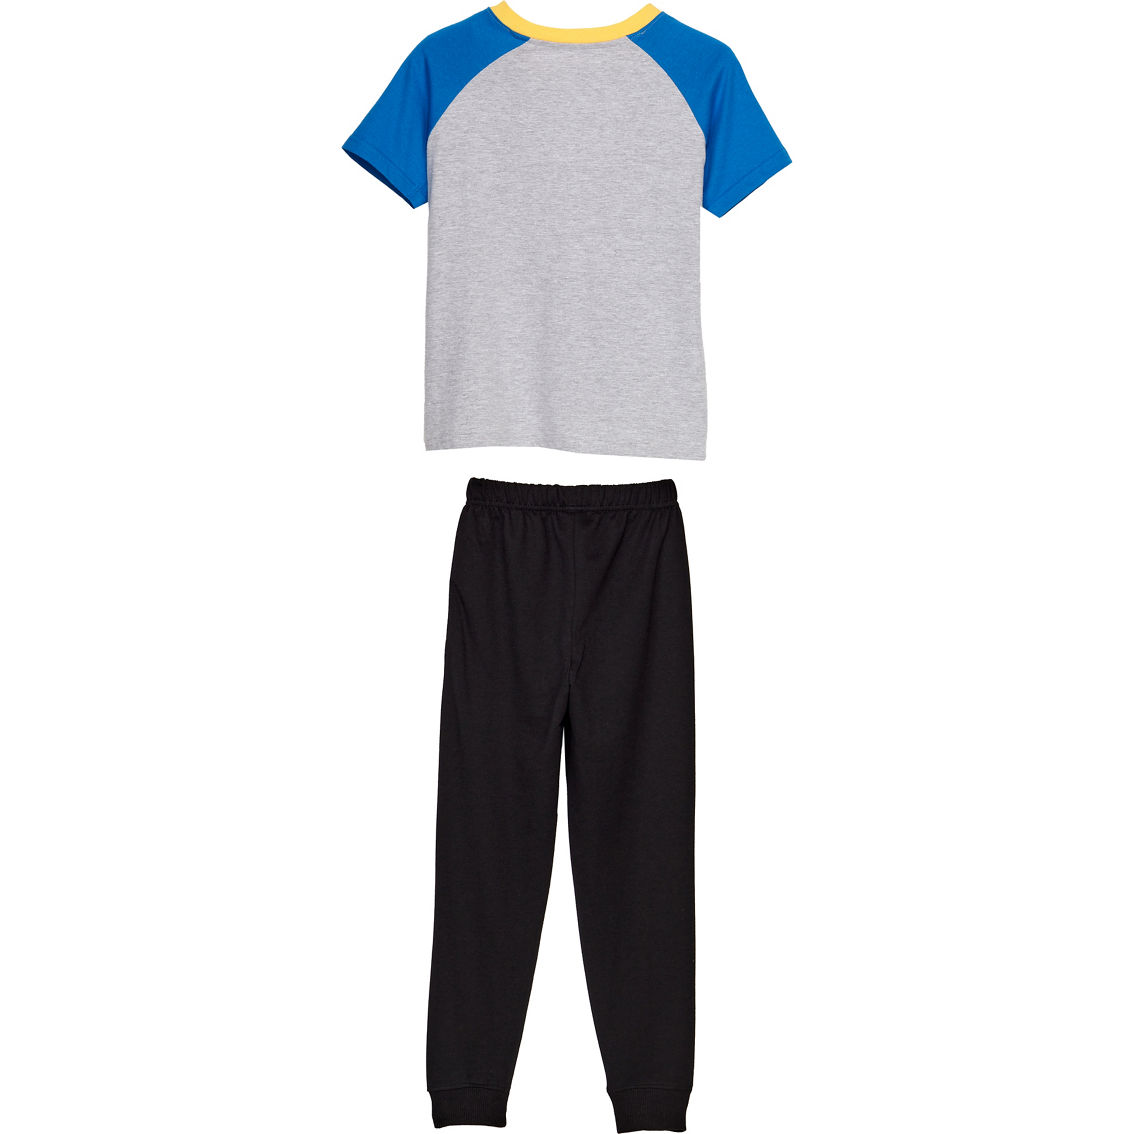 Nickelodeon Toddler Boys PAW Patrol French Terry Tee and Fleece Joggers 2 pc. Set - Image 2 of 2